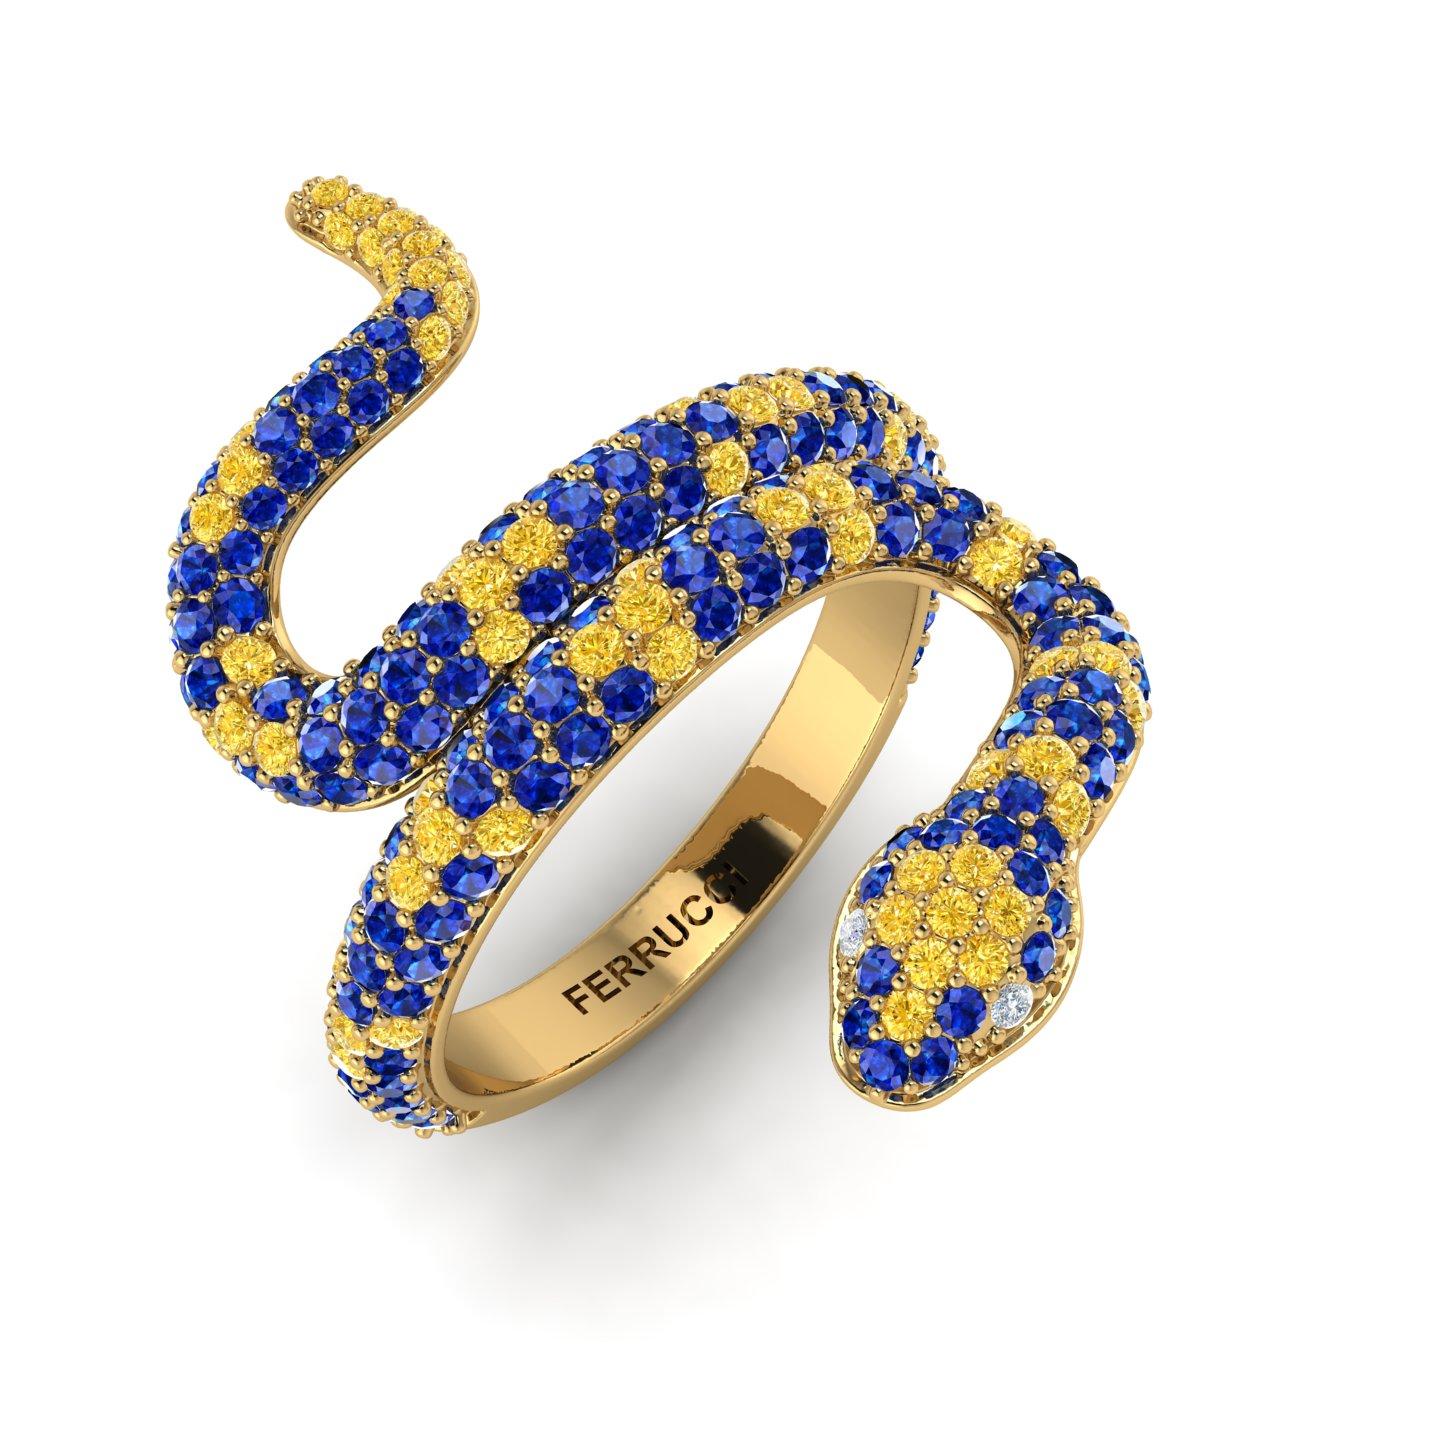 Blue Sapphires Pave' Snake 14k Yellow Gold Ring, with Yellow Sapphires, hand picked, totalling approximately 1.35 carats, made in 14k Yellow gold to help the slim design, to have more robustness, with white diamonds as eyes.
Made to order in your